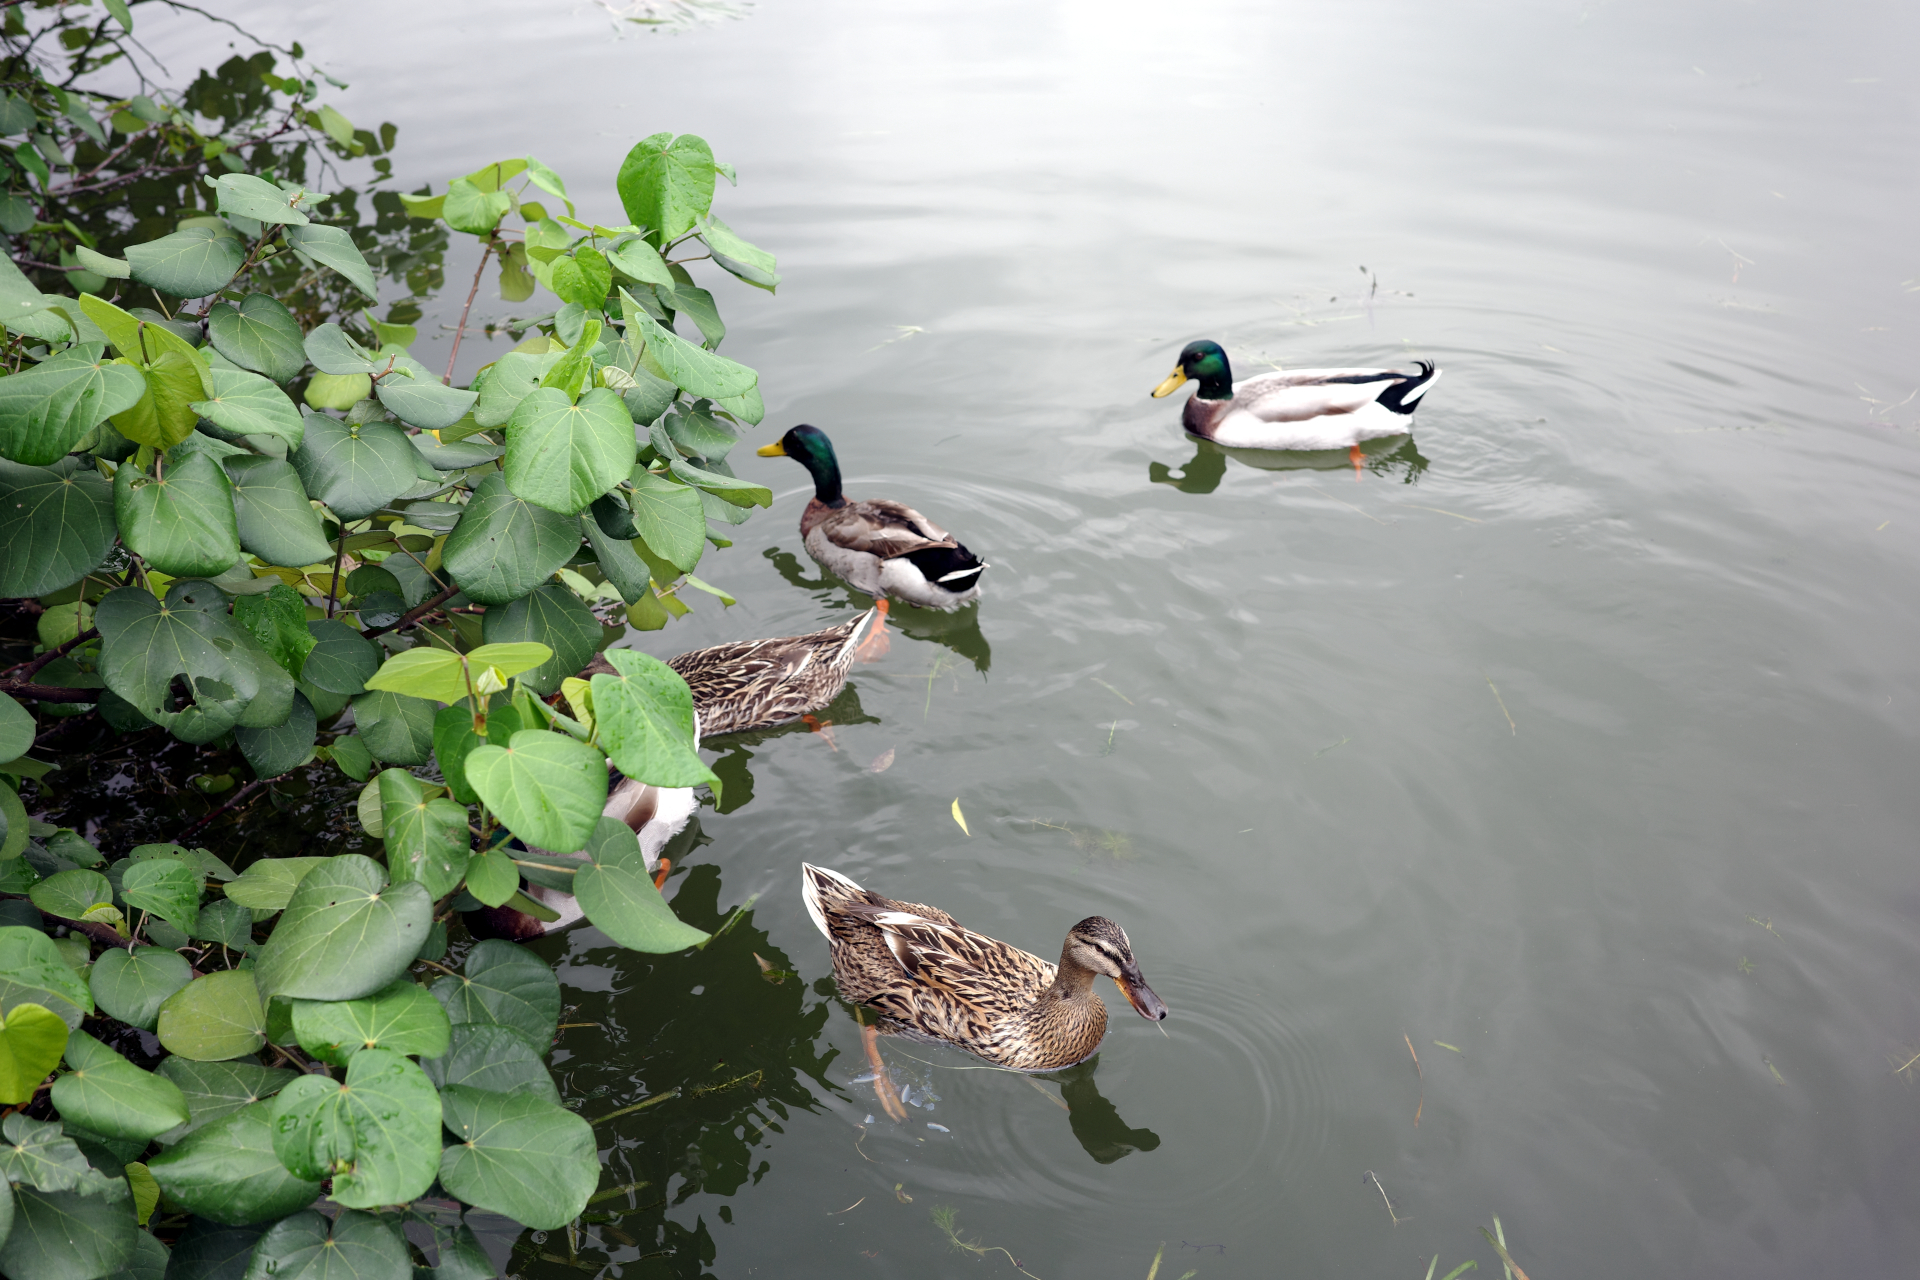 A group of ducks